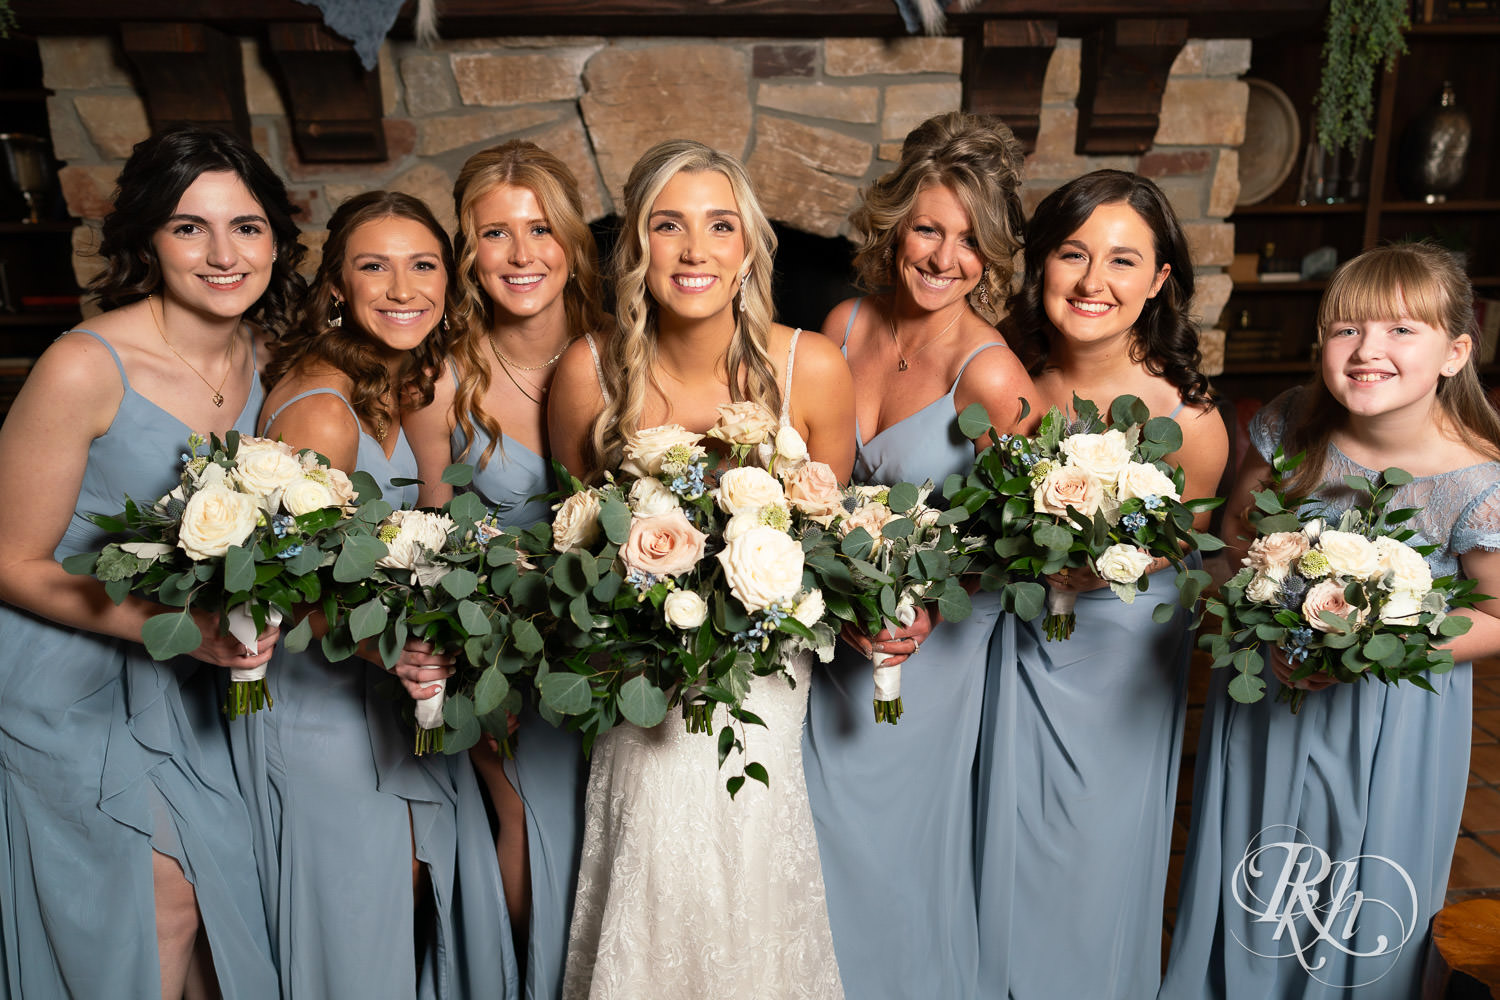 Wedding party smiles with the bride during wedding photography at Bavaria Downs in Chaska, Minnesota.